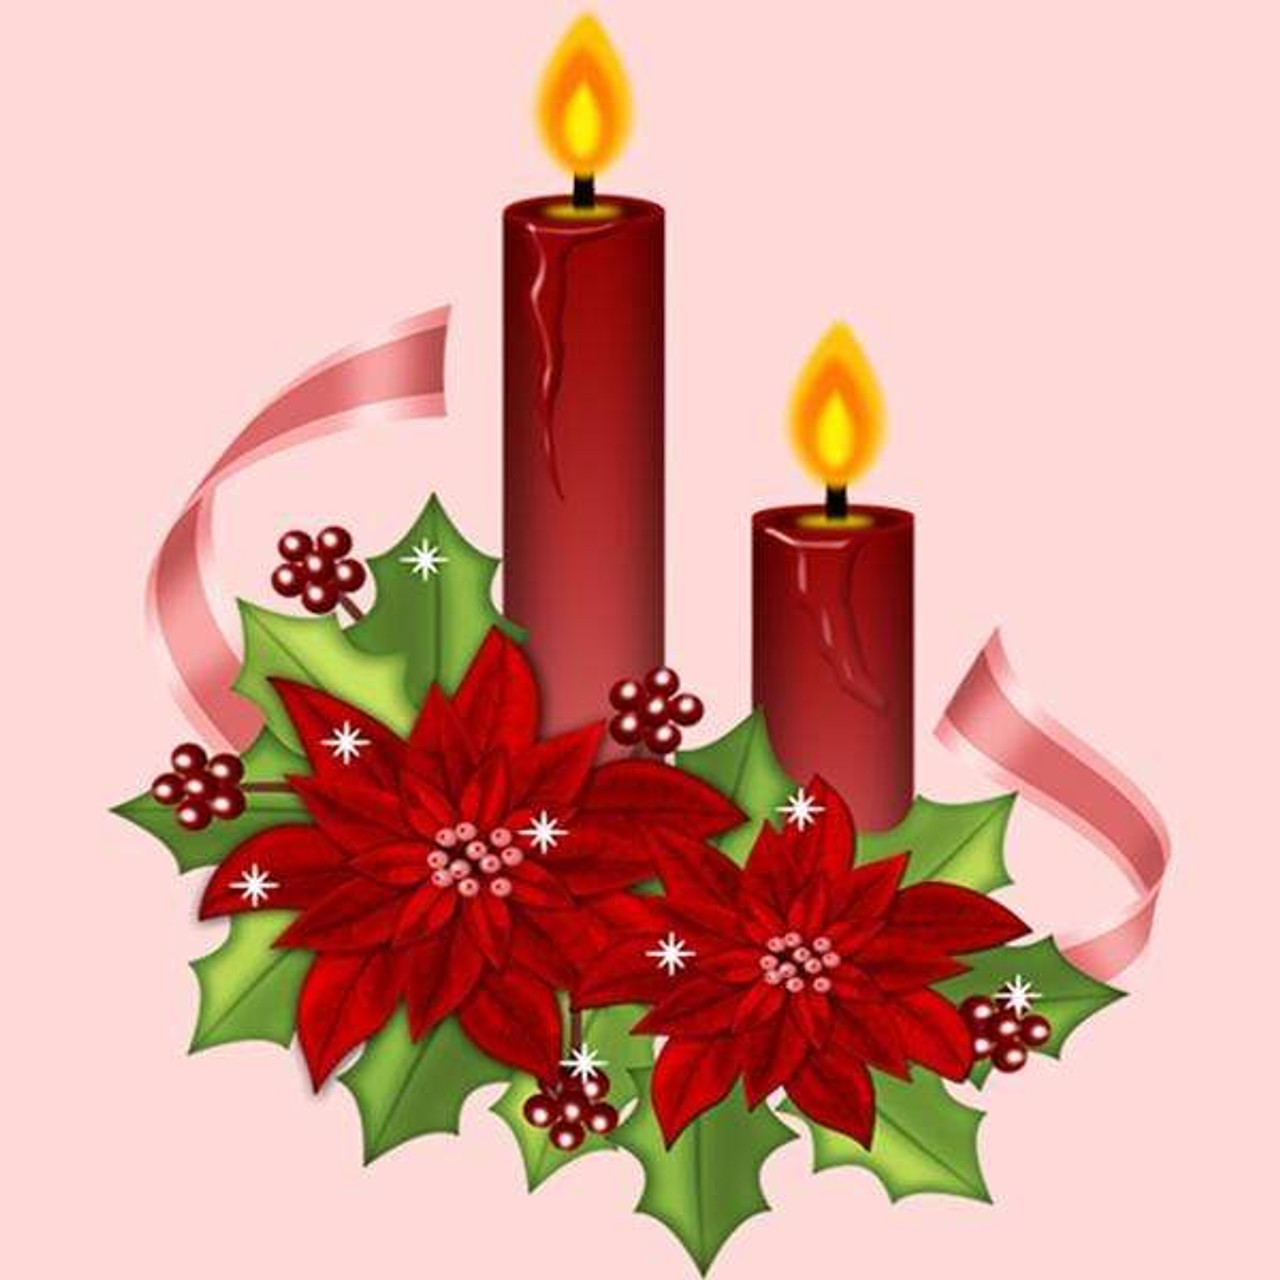 5D Diamond Painting Red Poinsettia Candles Kit